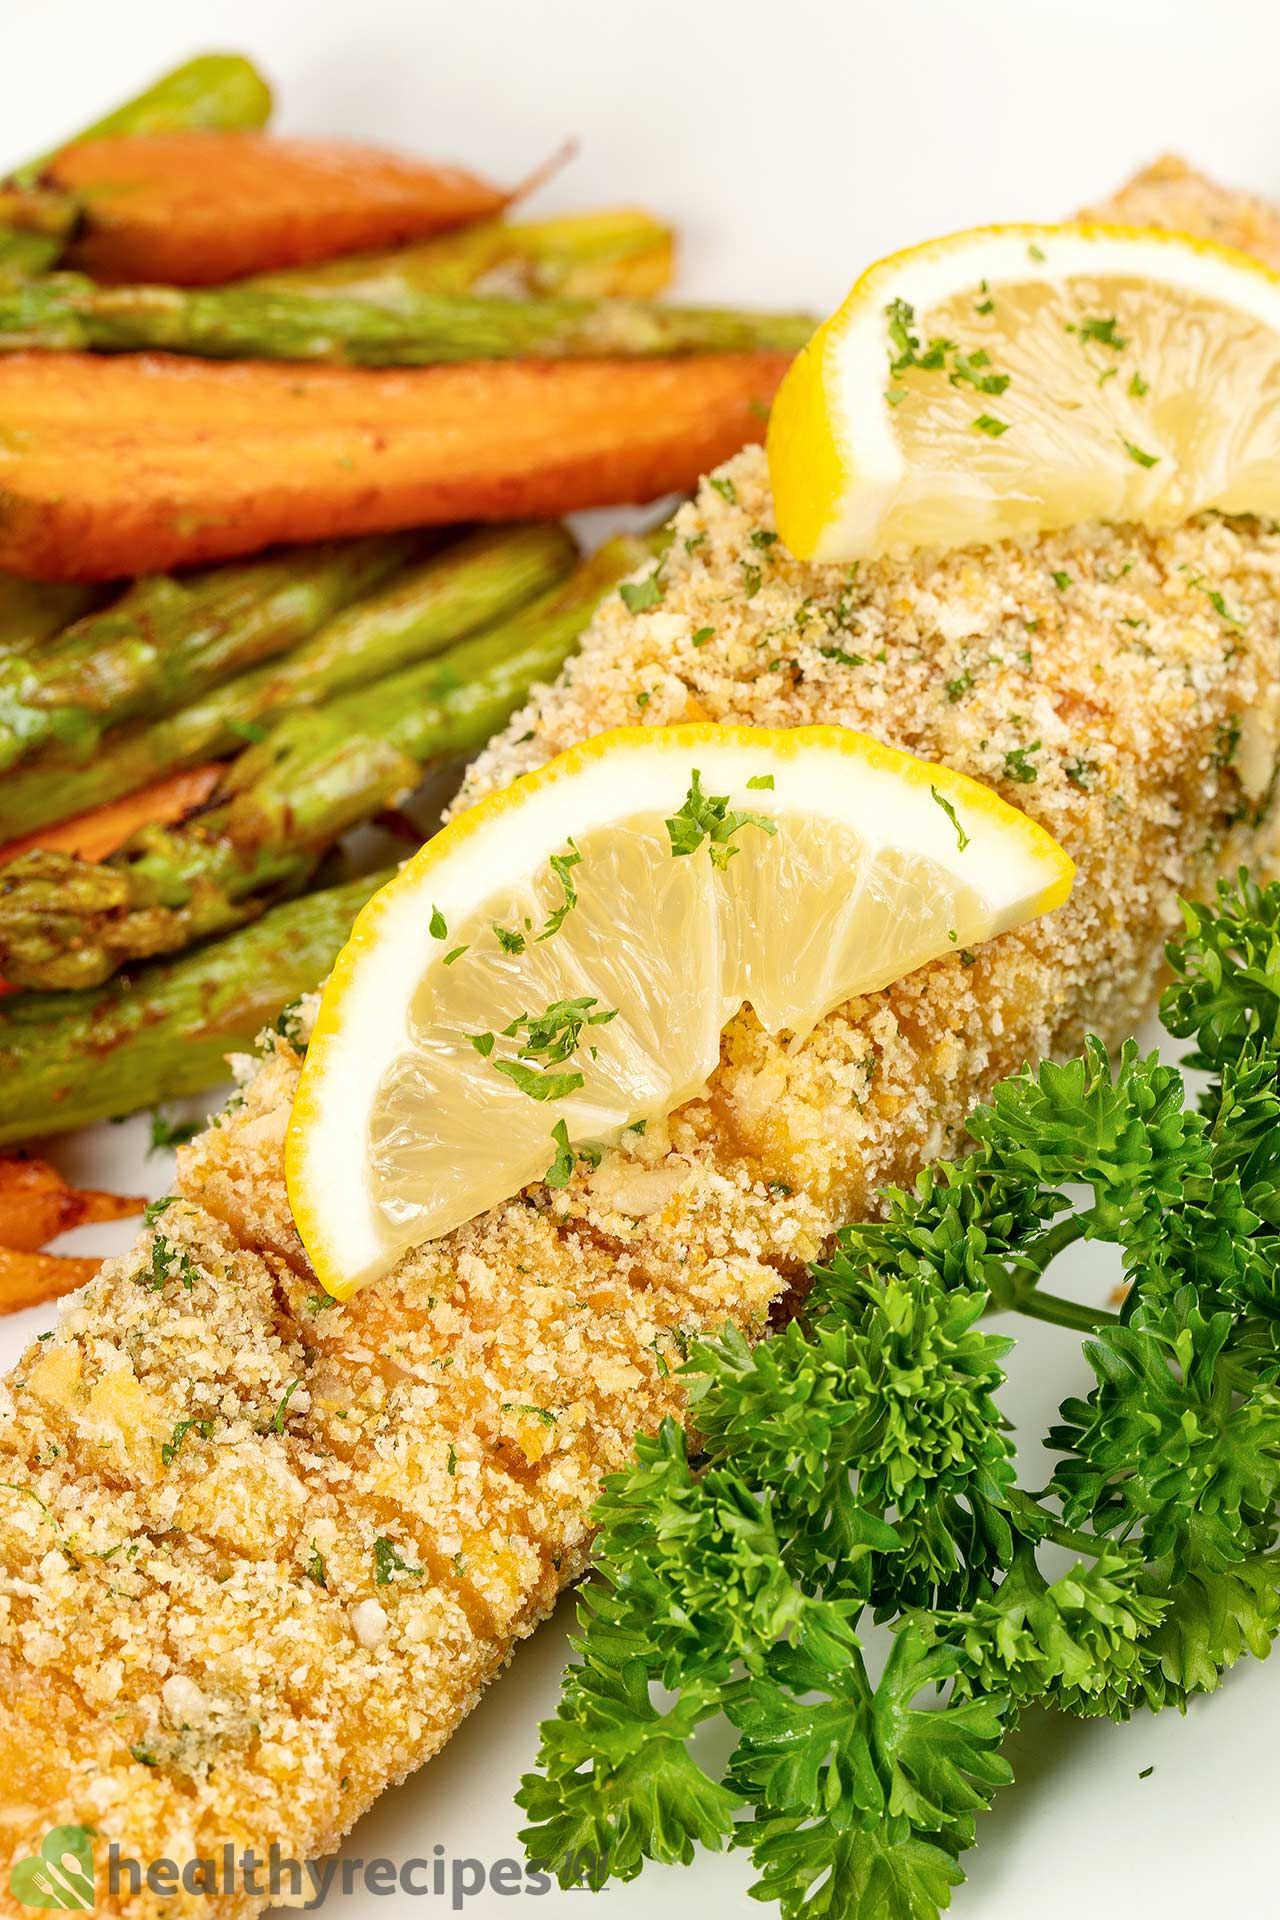 Parmesan Crusted Salmon Recipe With Asparagus